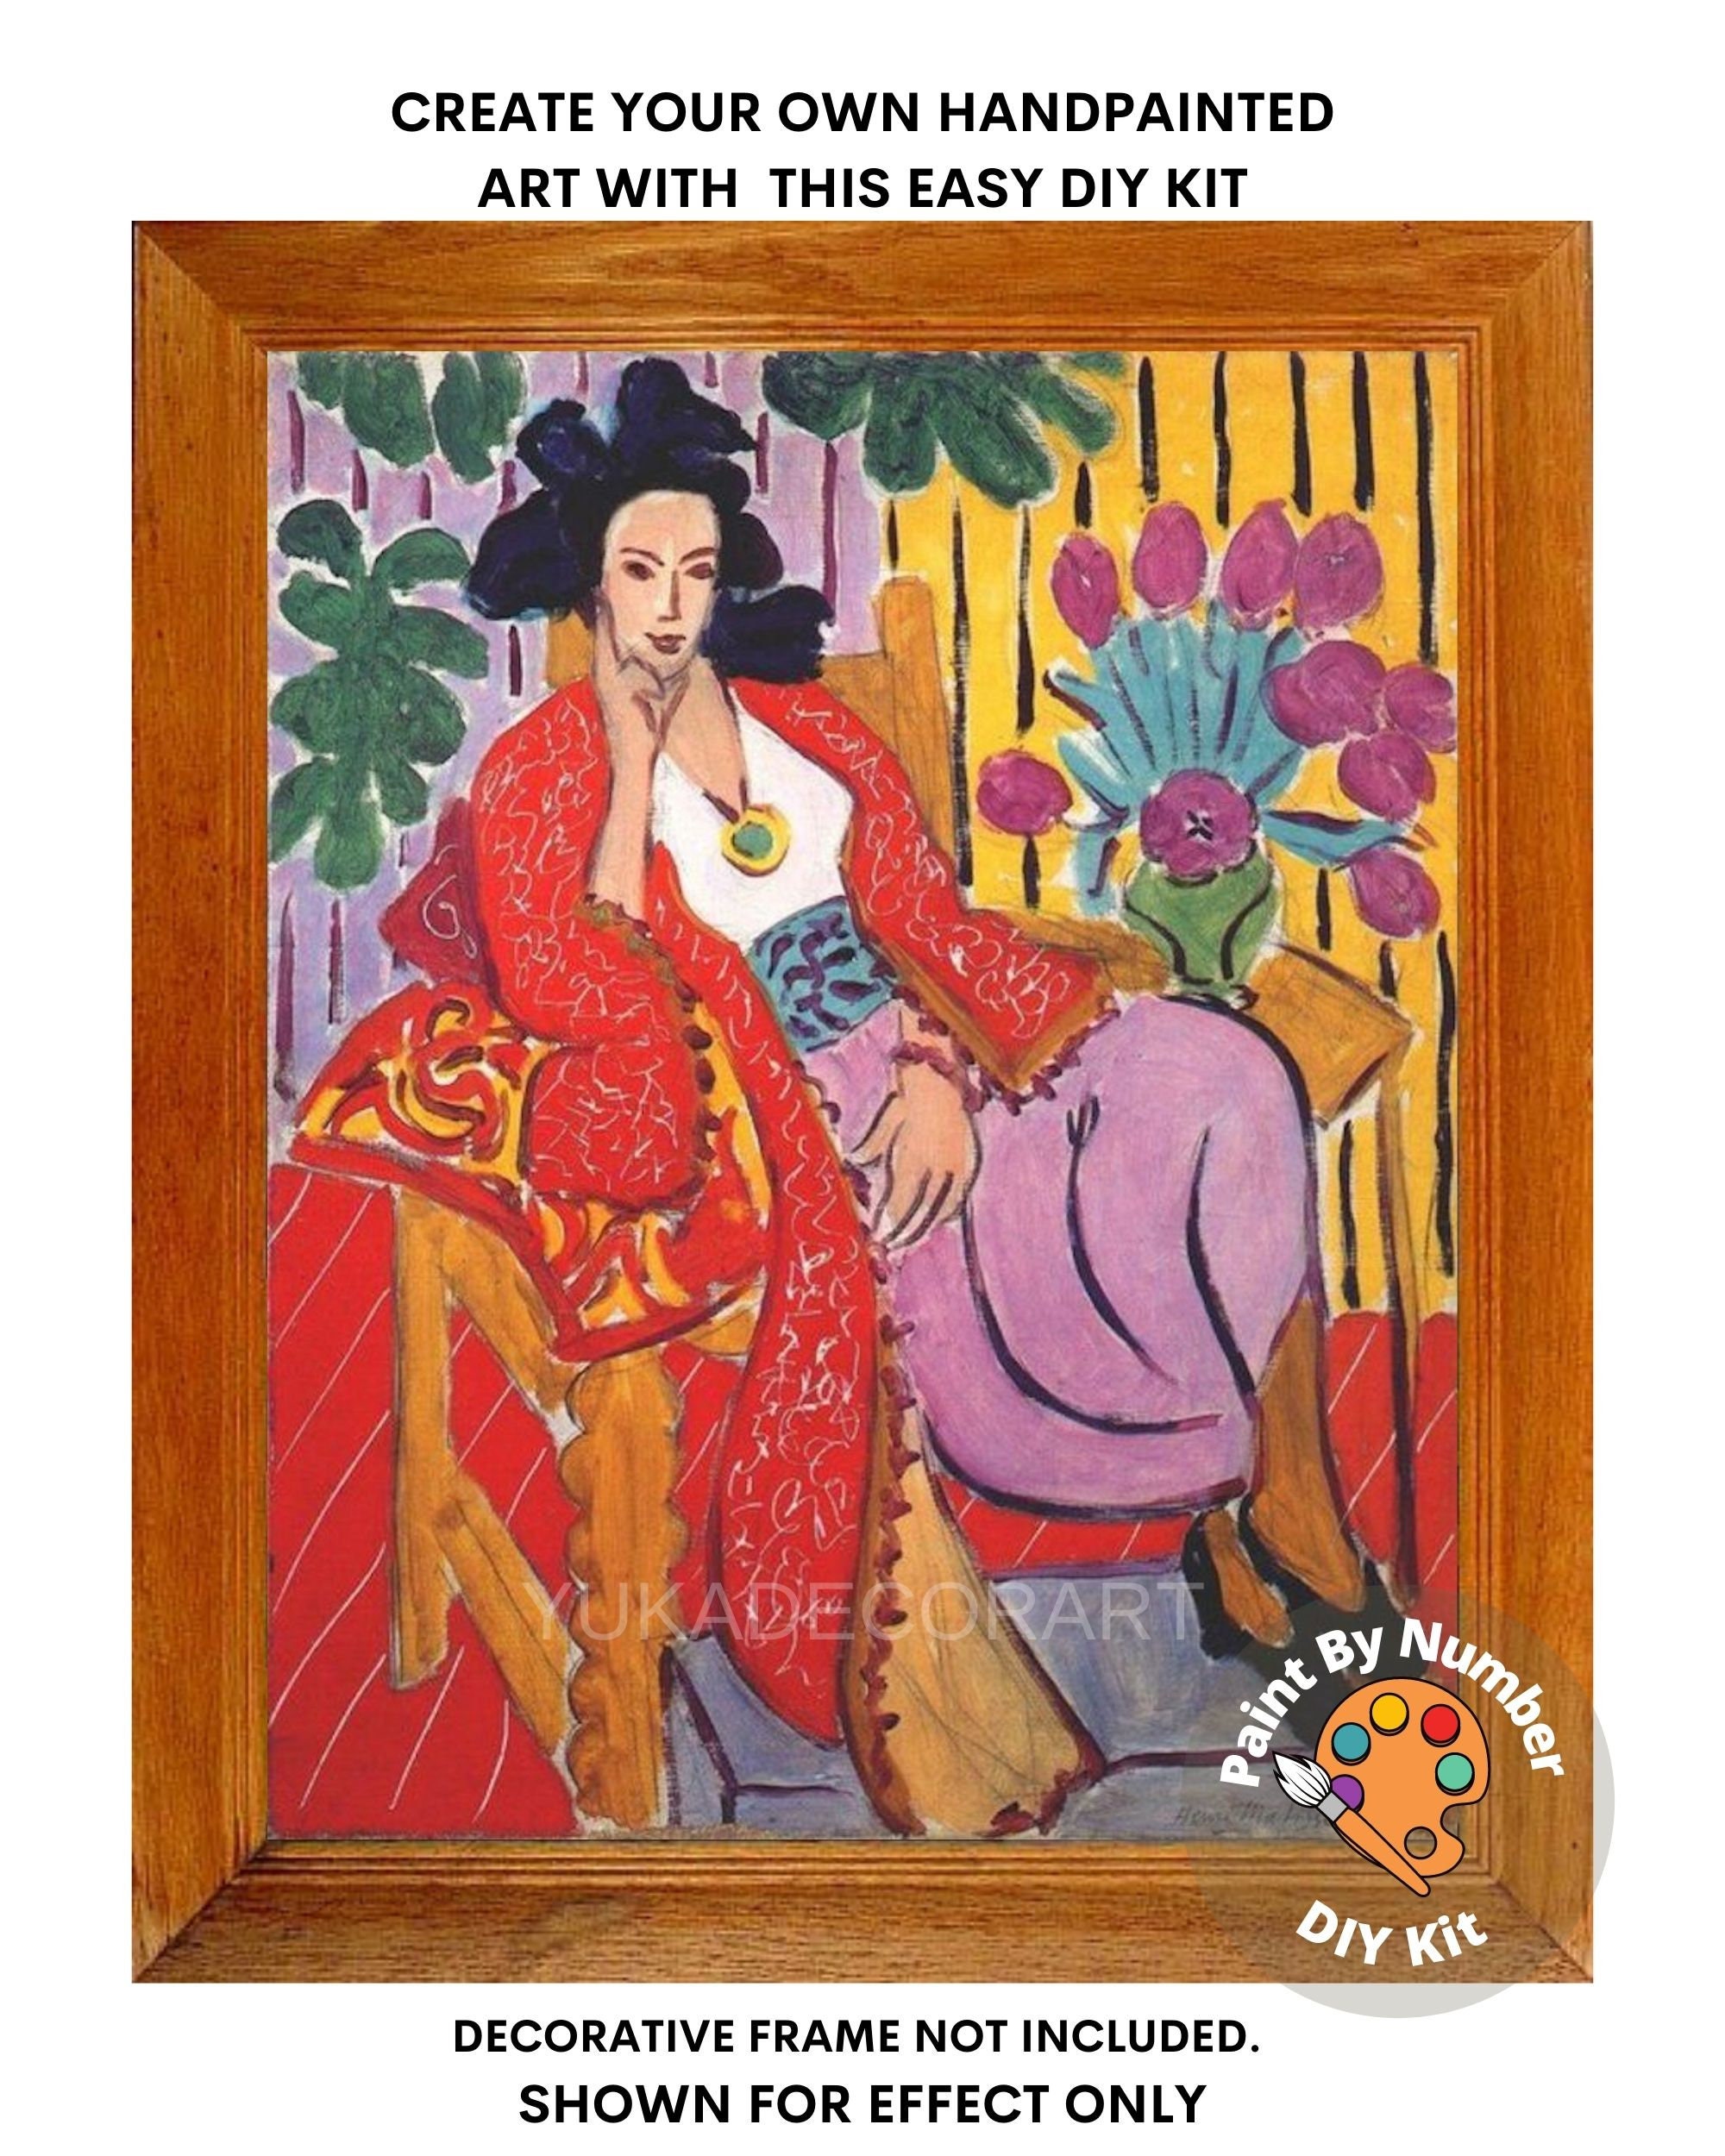 Henri Matisse PAINT by NUMBER Kit for Adults , Woman on Couch,easy  Beginners Acrylic Paint DIY Kit ,living Bedroom Wall Art Decor 